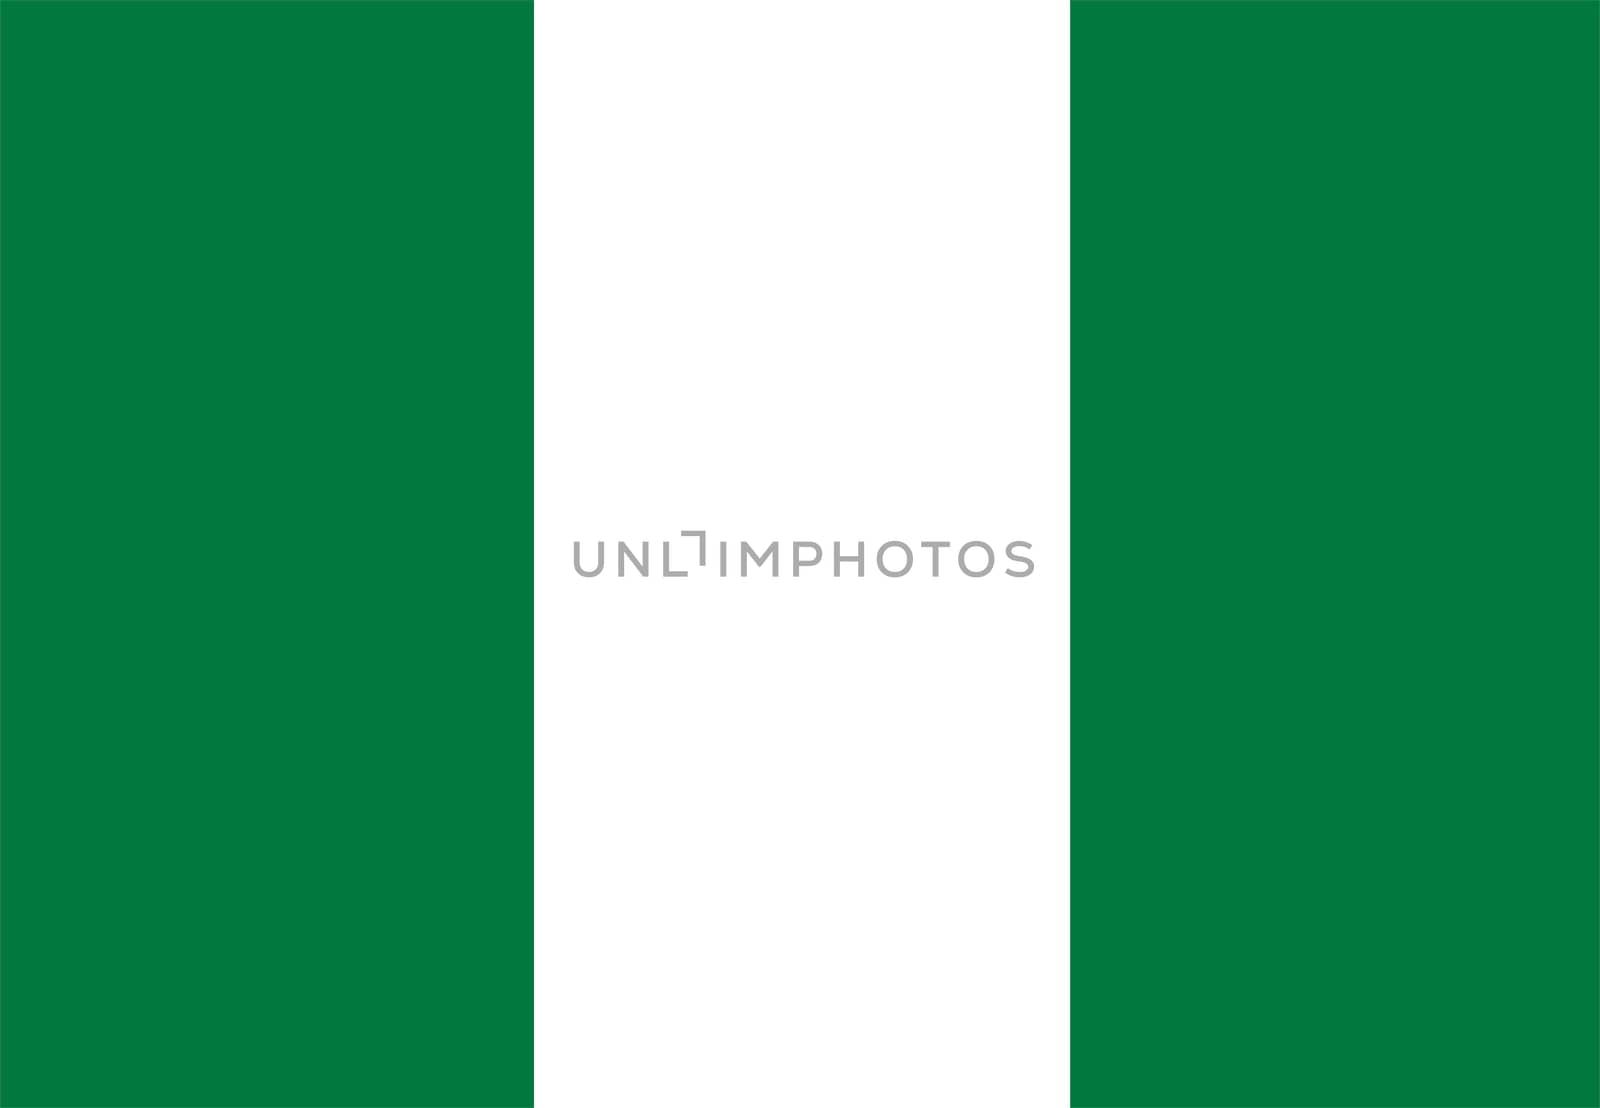 2D illustration of the flag of Nigeria vector